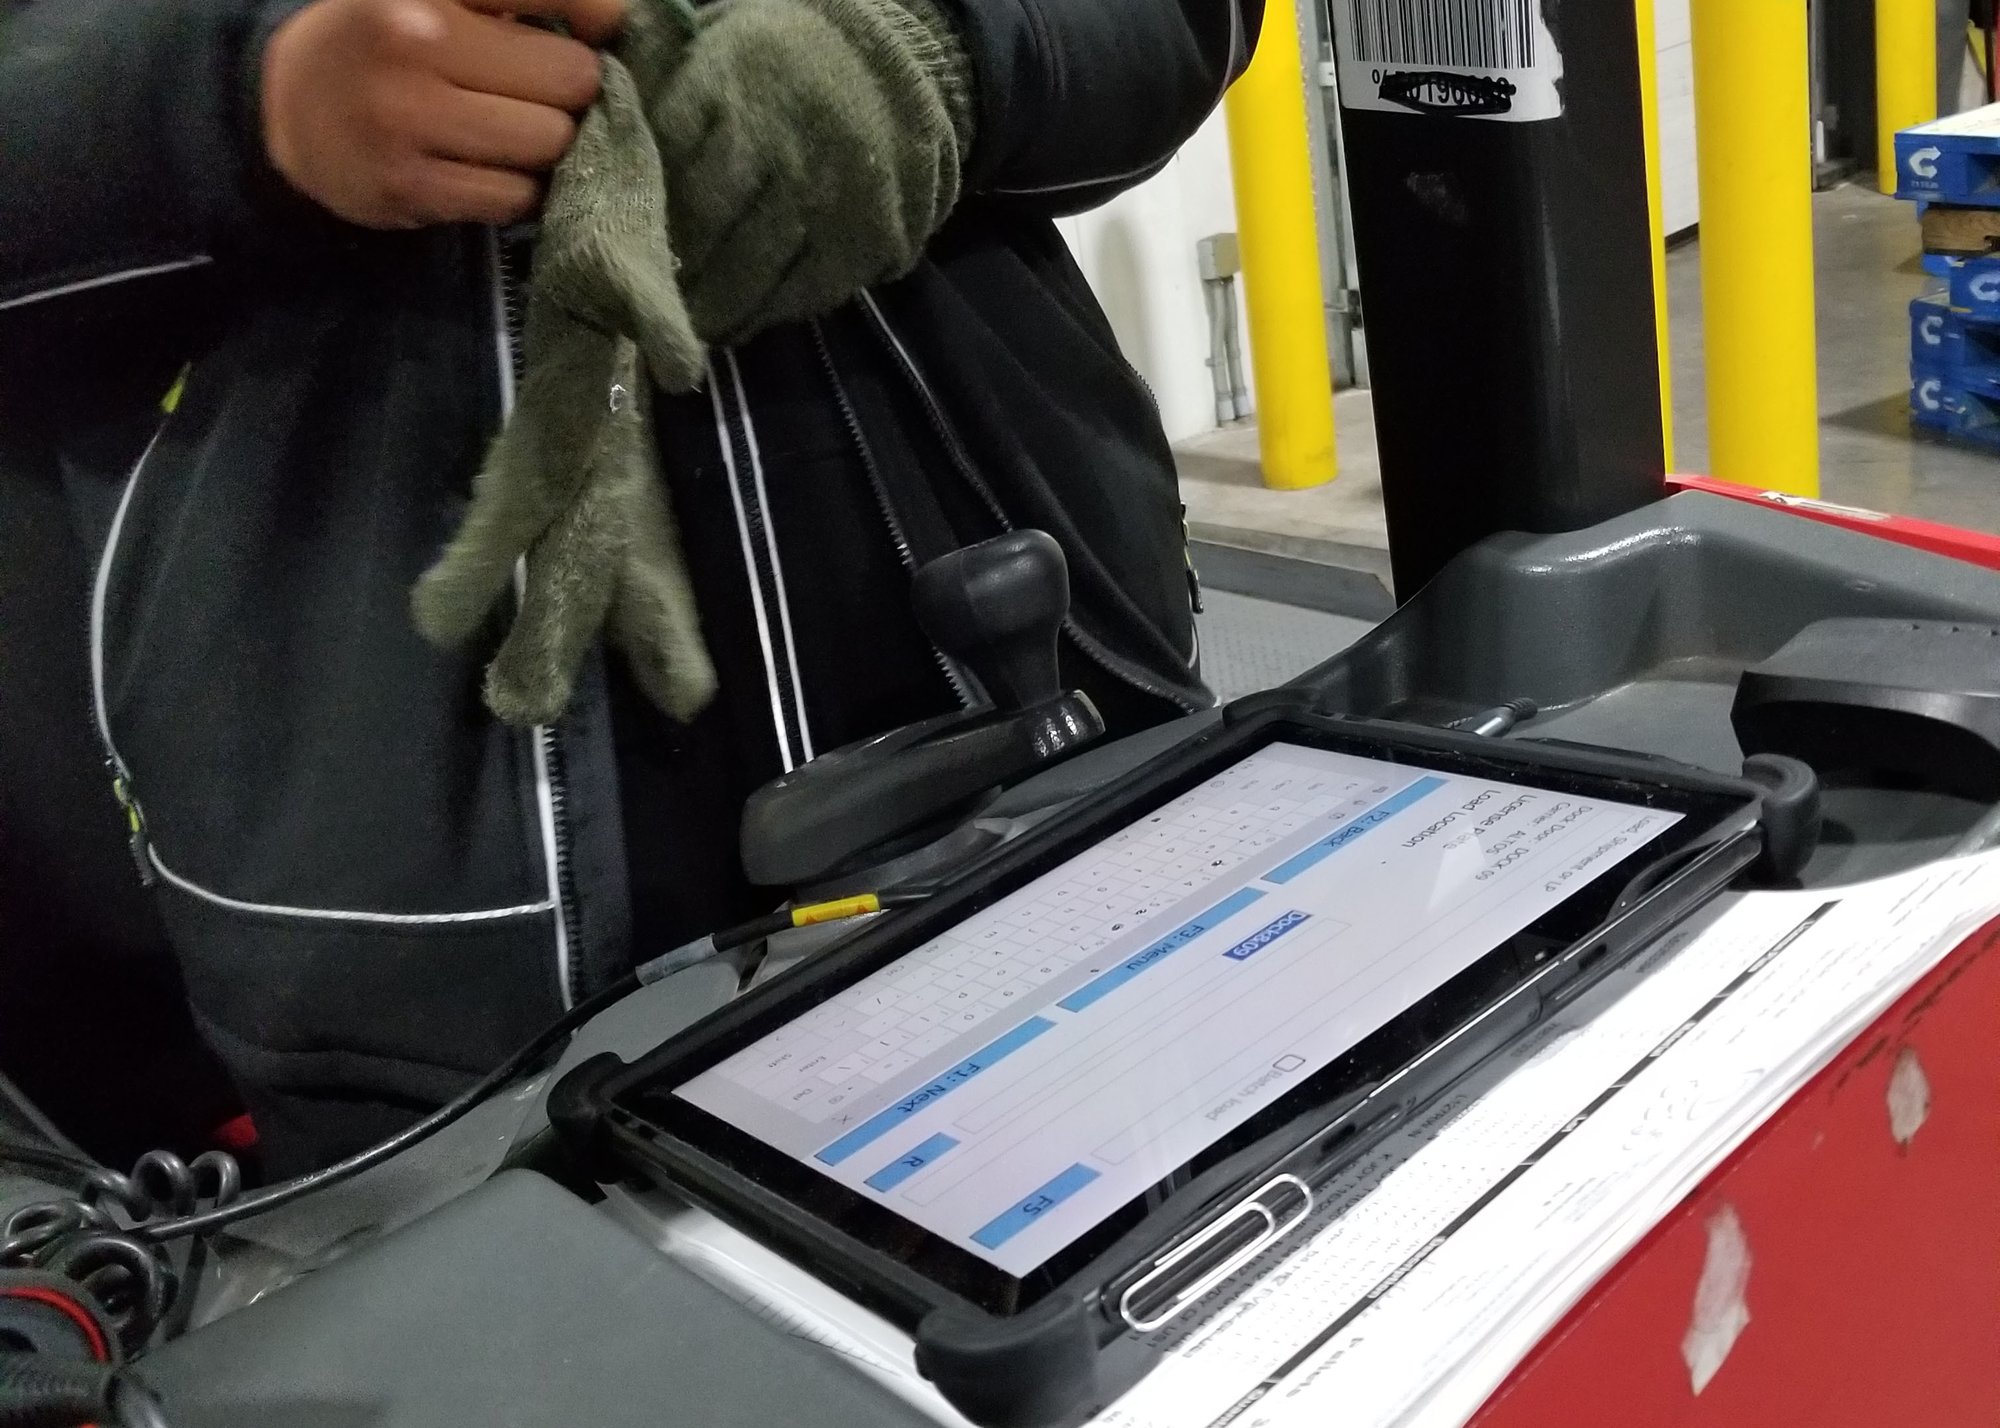 person putting on gloves next to rugged tablet